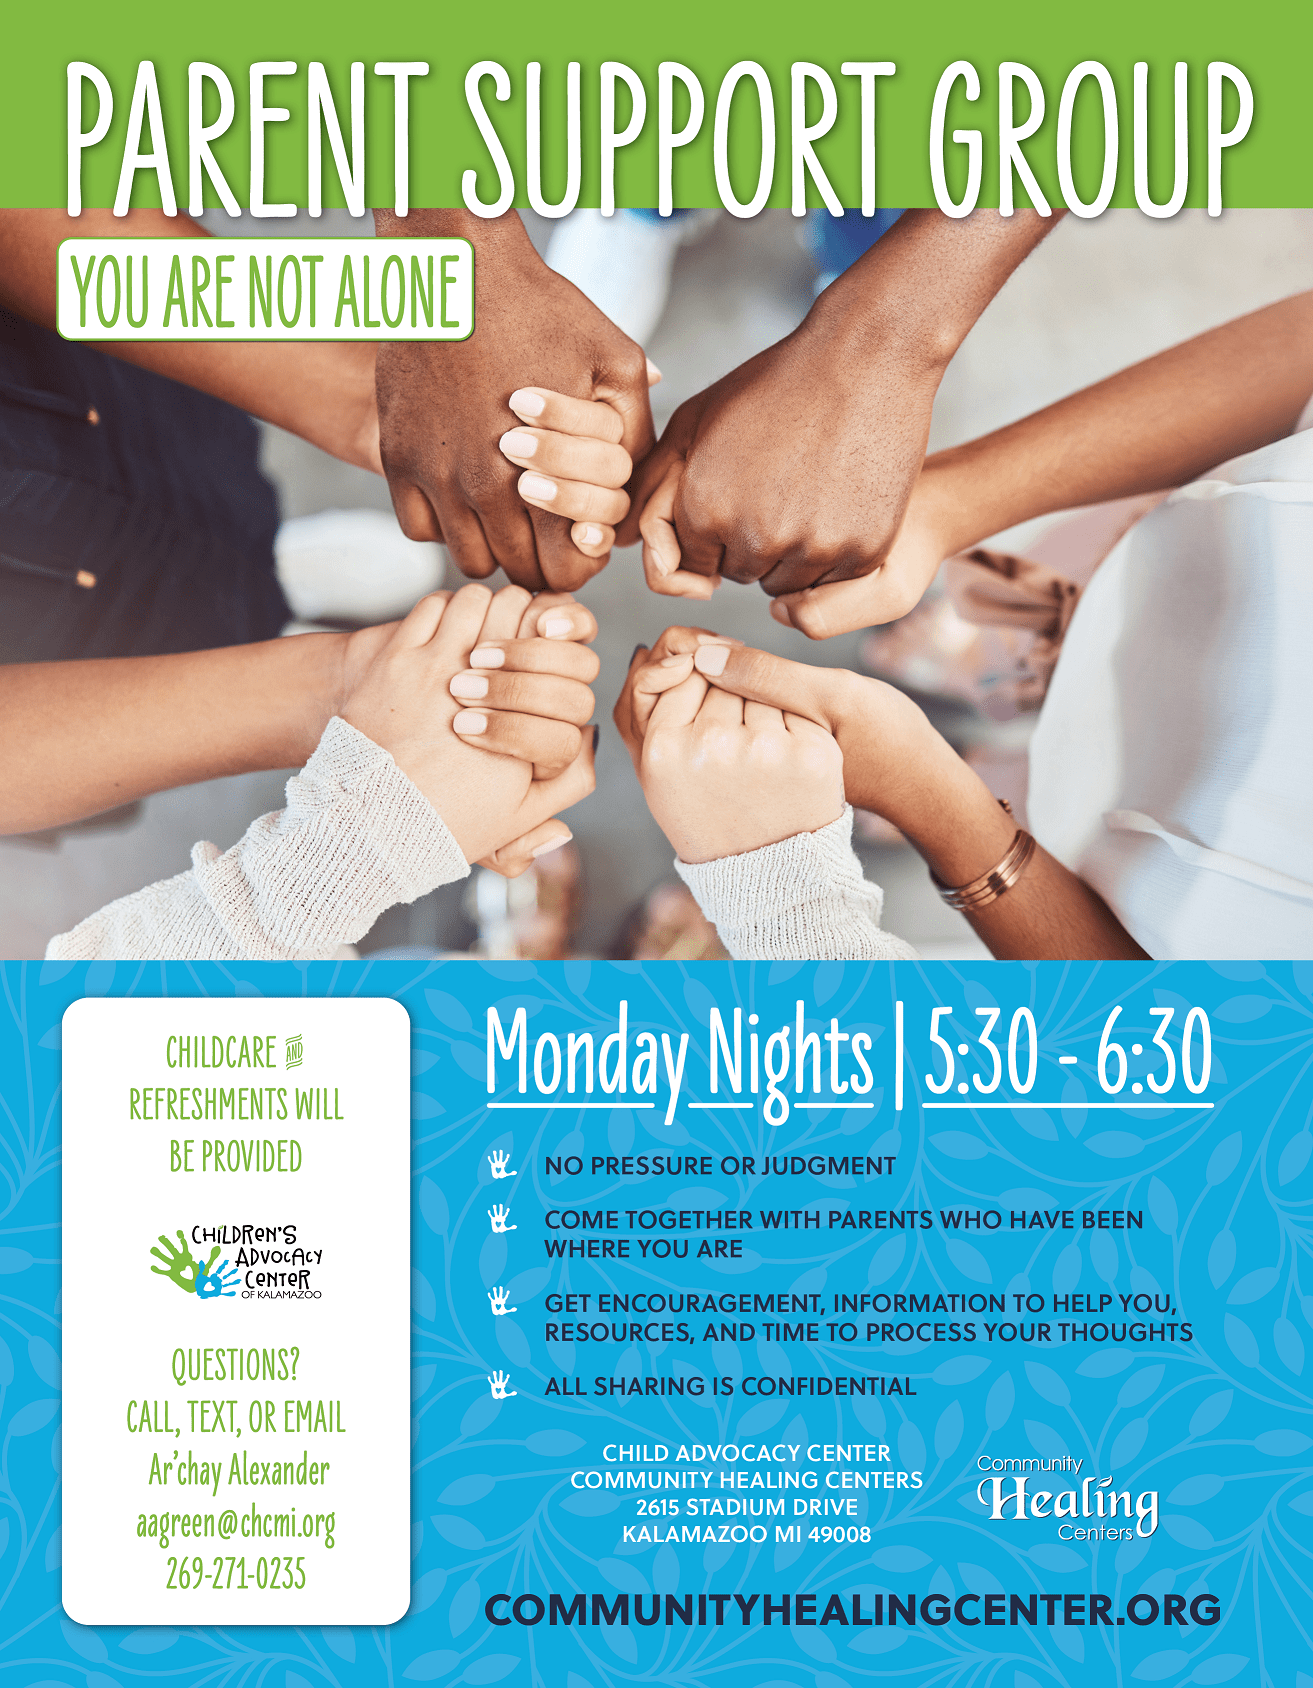 A flyer for parent support groups at Community Healing Center.